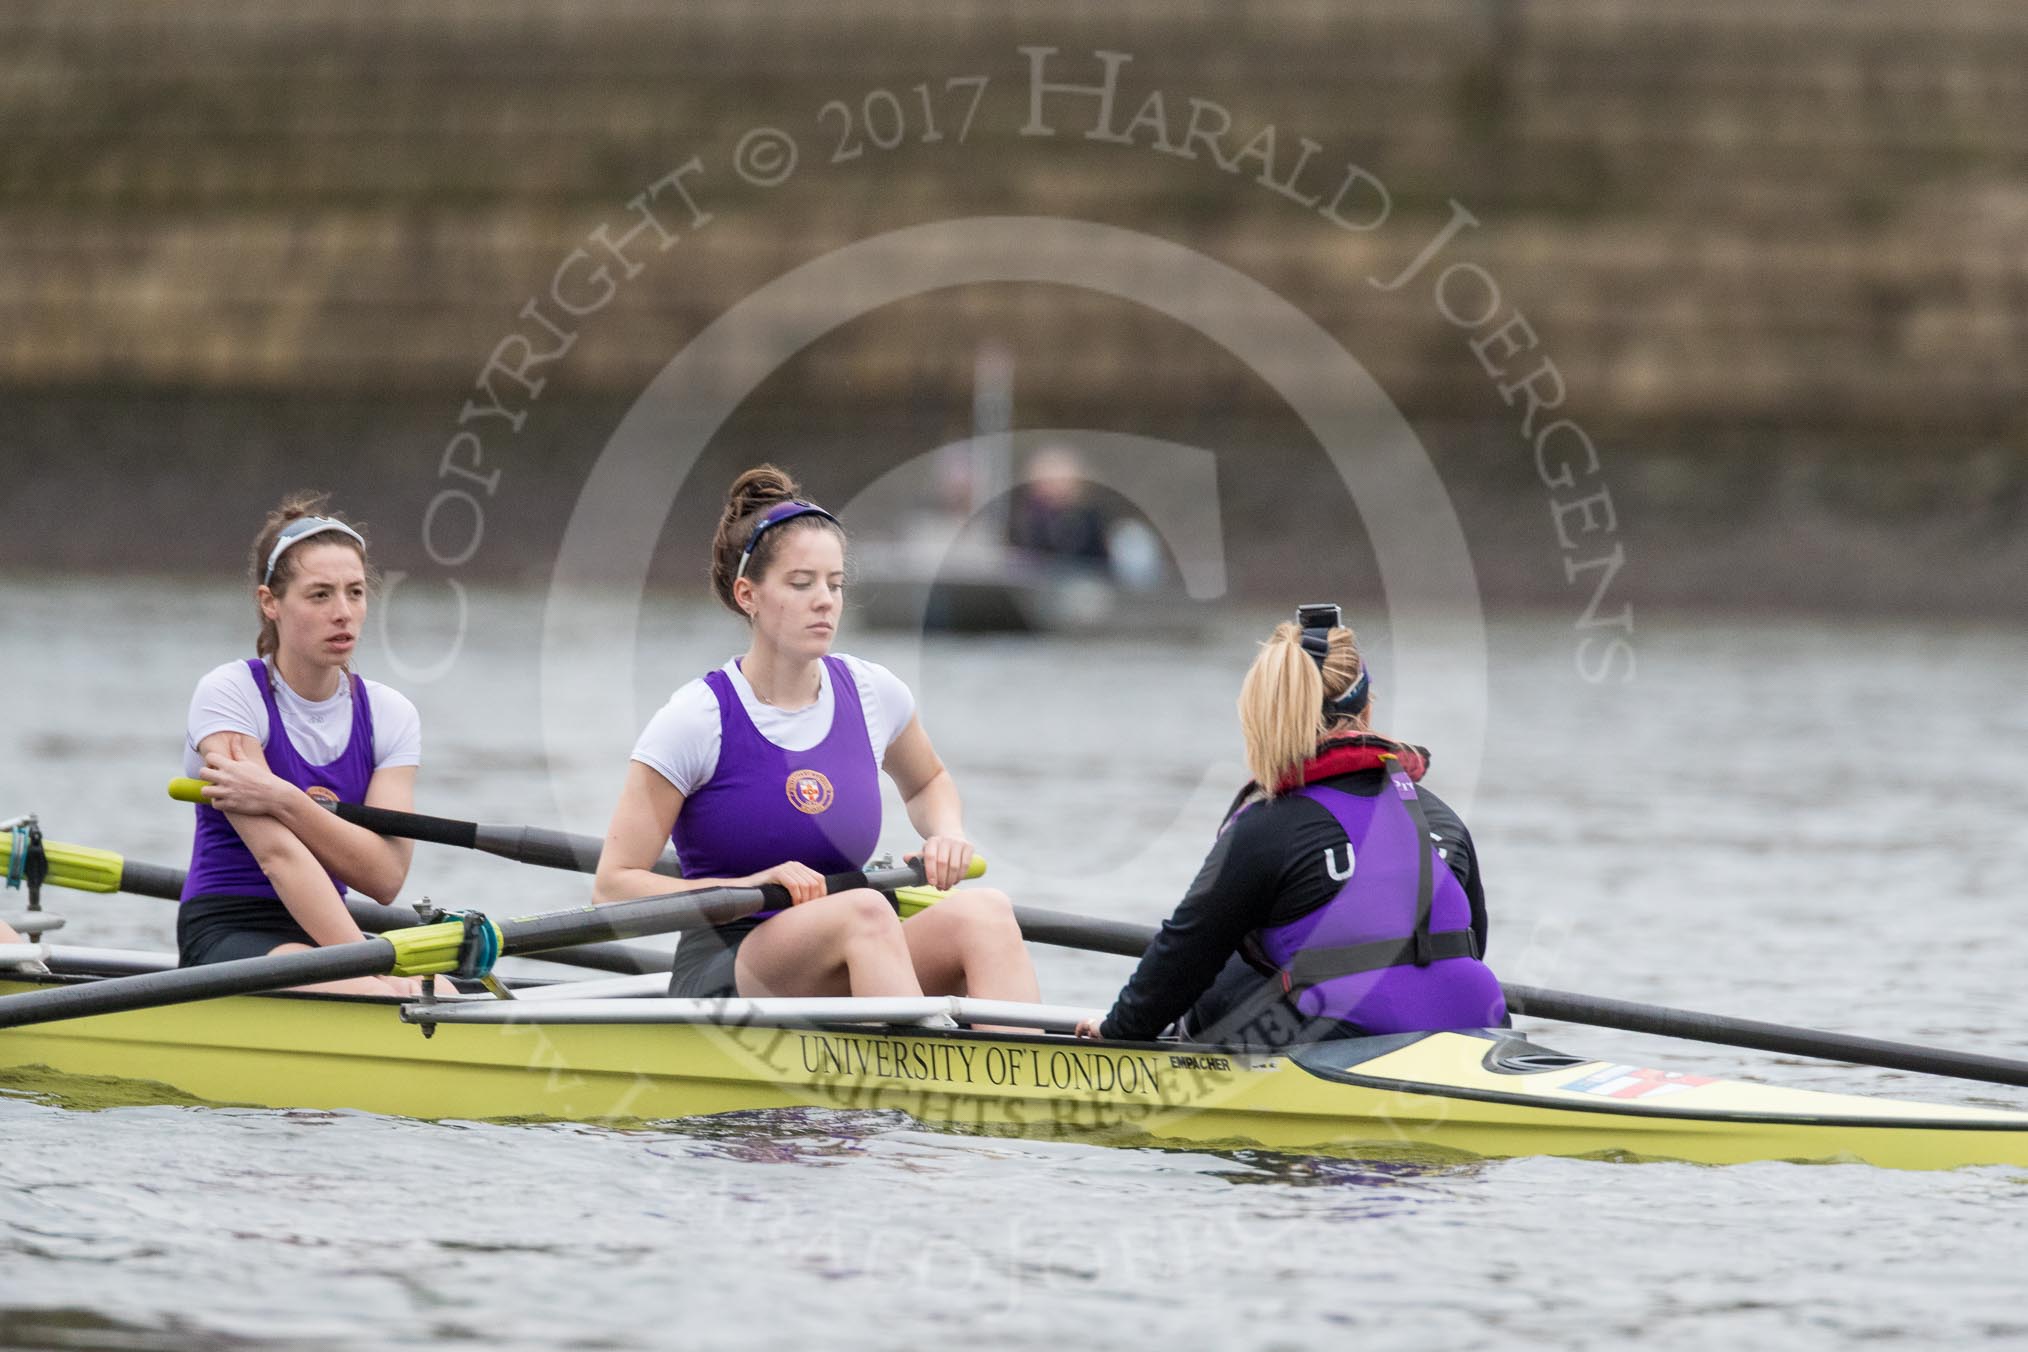 The Boat Race season 2017 - Women's Boat Race Fixture CUWBC vs Univerity of London: Meeting the UL 2nd eight at the start of their fixture vs the CUWBC lightweight squad.
River Thames between Putney Bridge and Mortlake,
London SW15,

United Kingdom,
on 19 February 2017 at 15:45, image #23